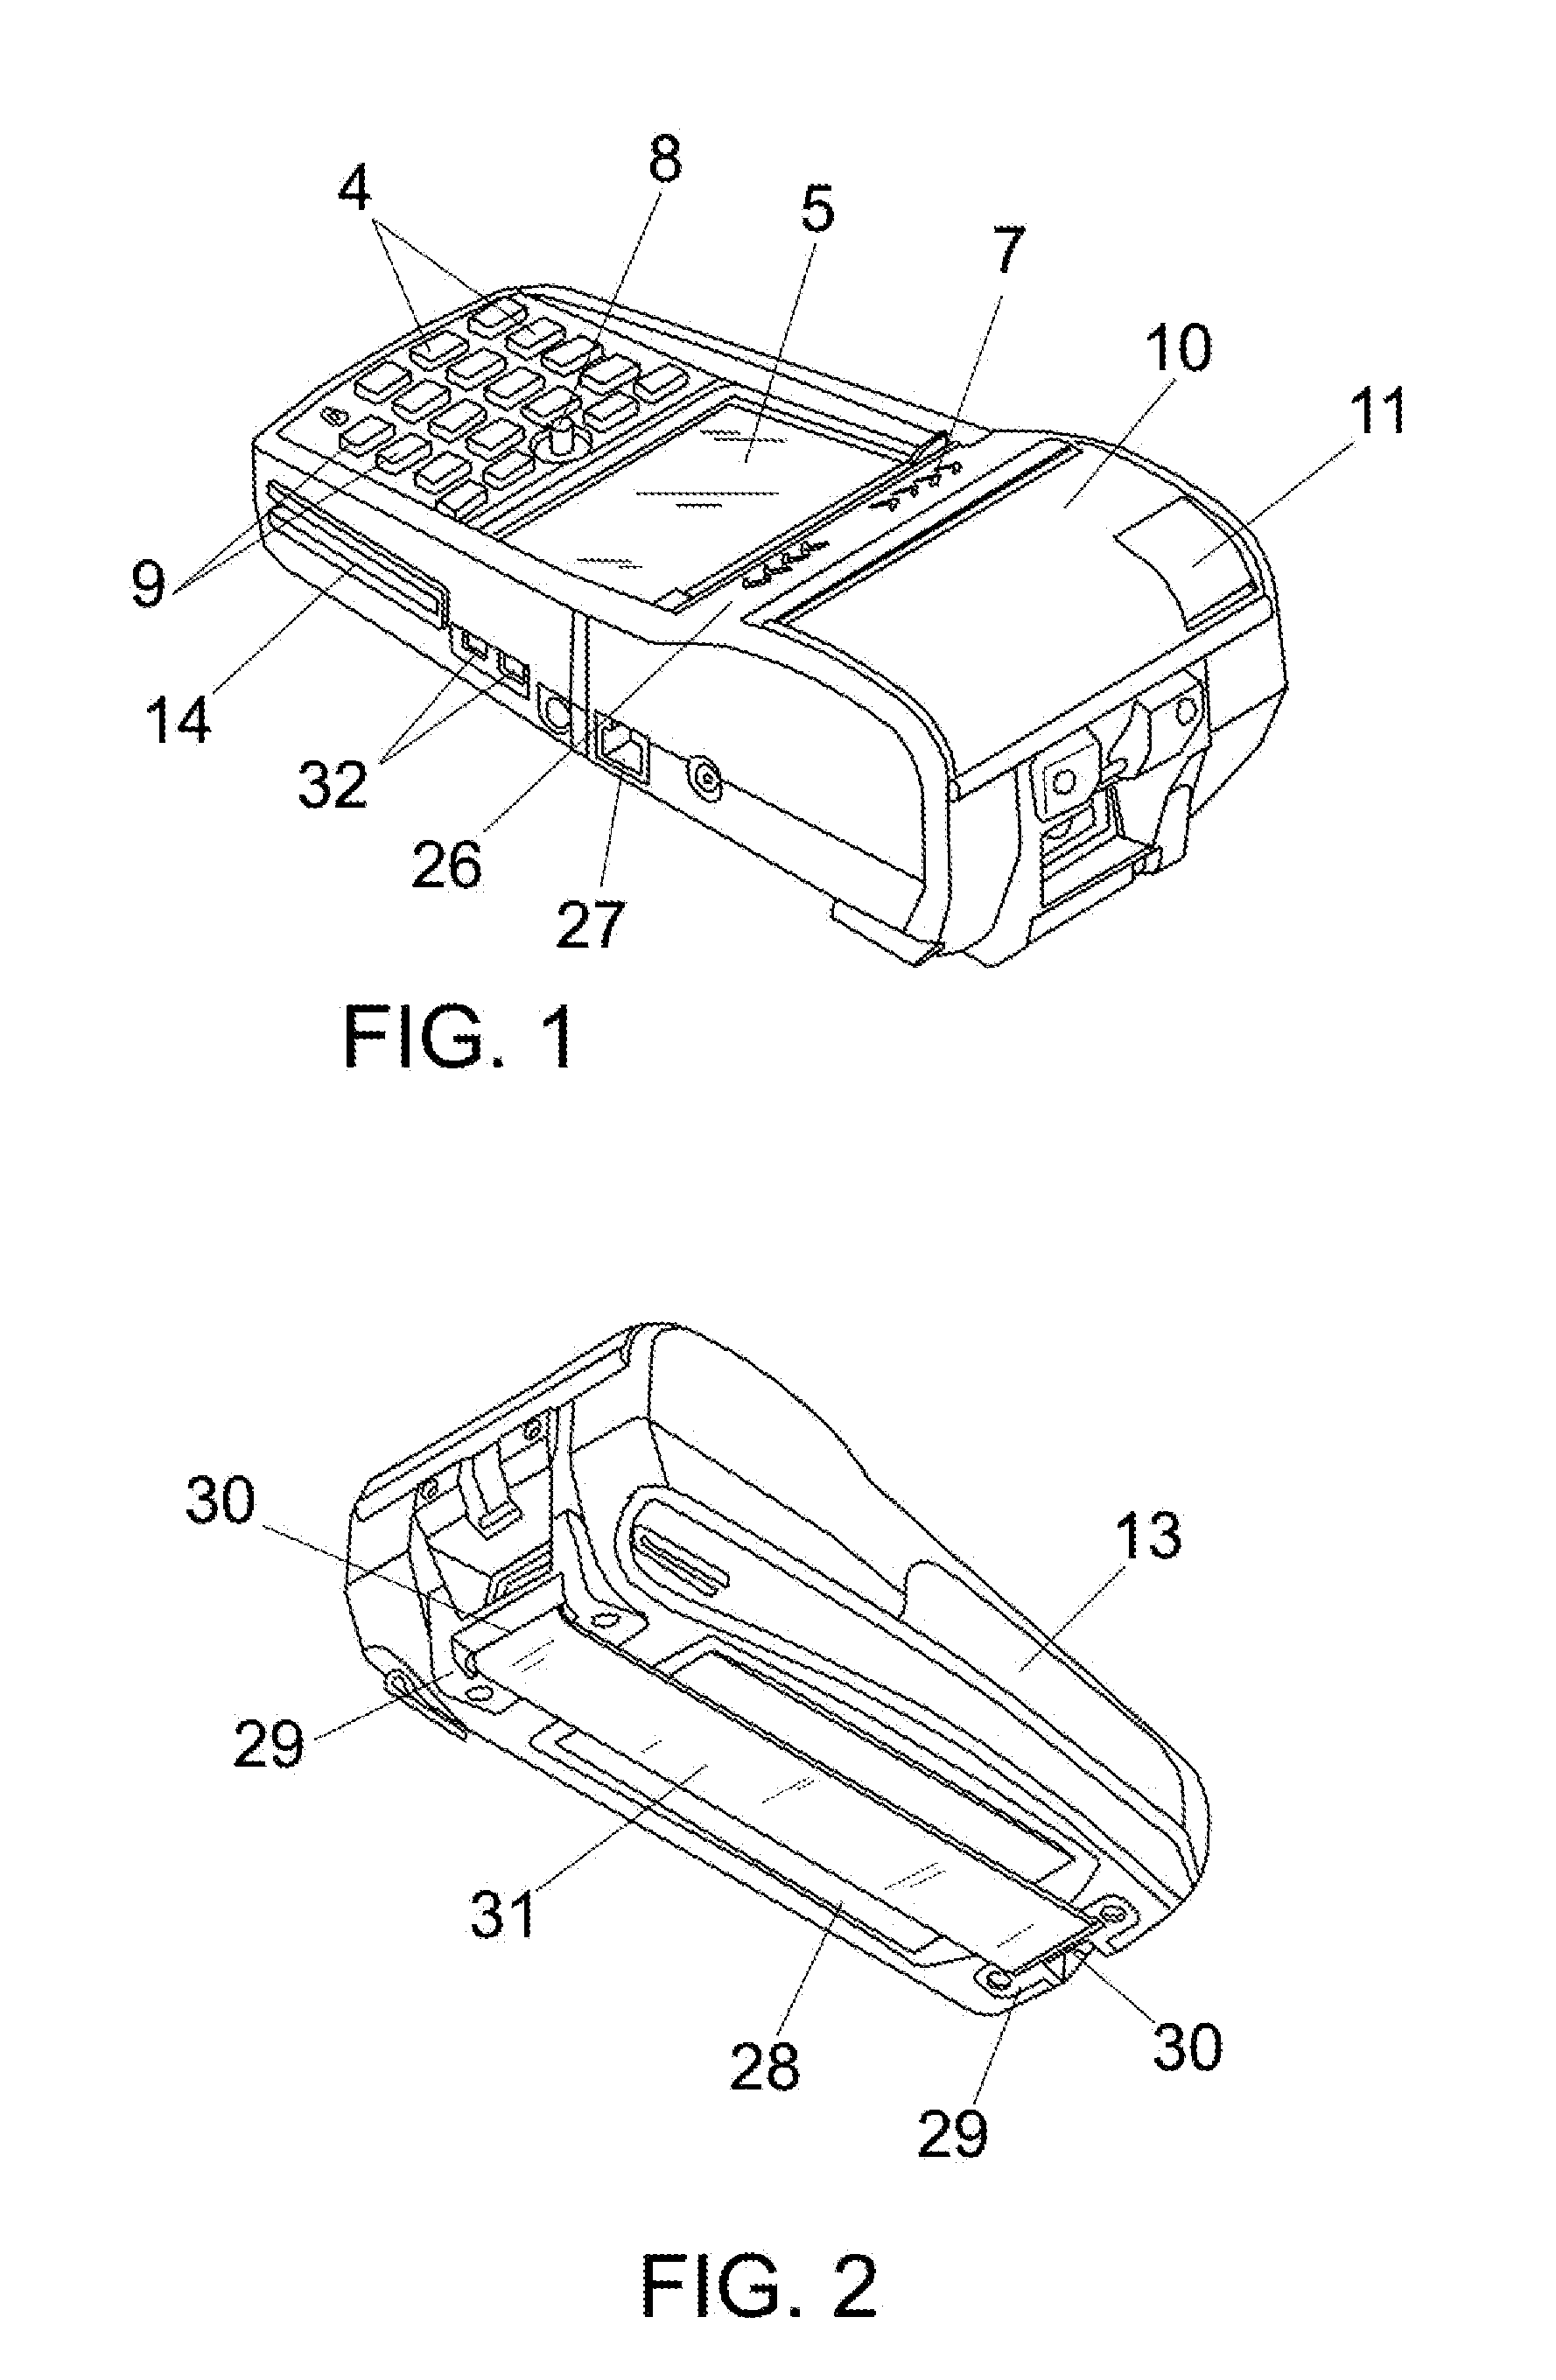 Multi-communication assisted portable terminal